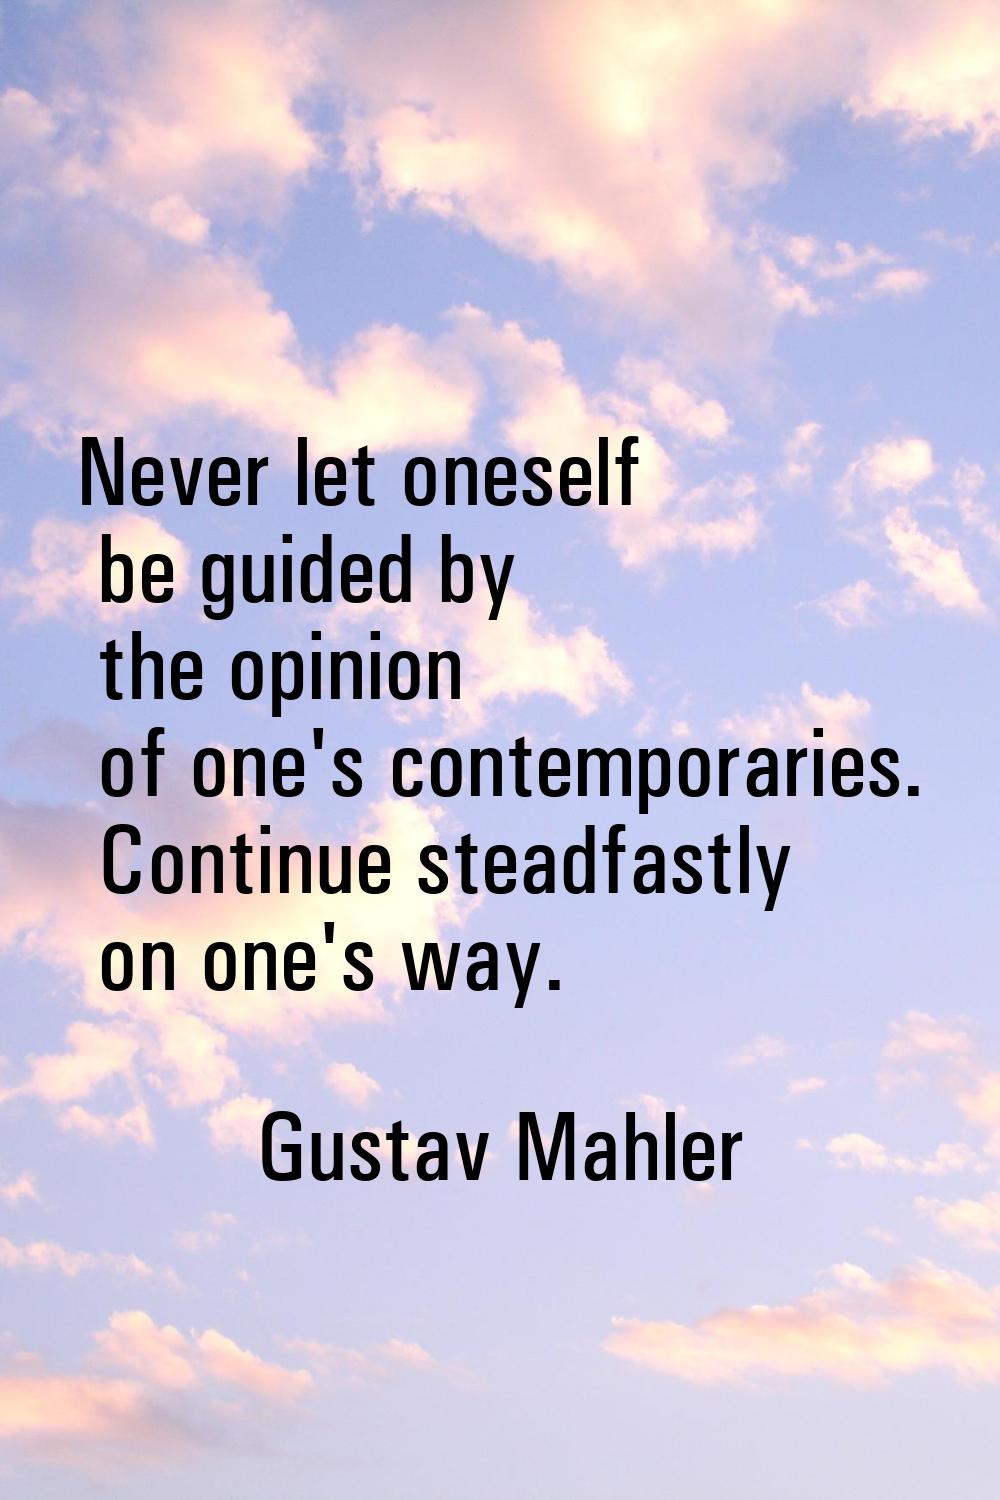 Never let oneself be guided by the opinion of one's contemporaries. Continue steadfastly on one's w